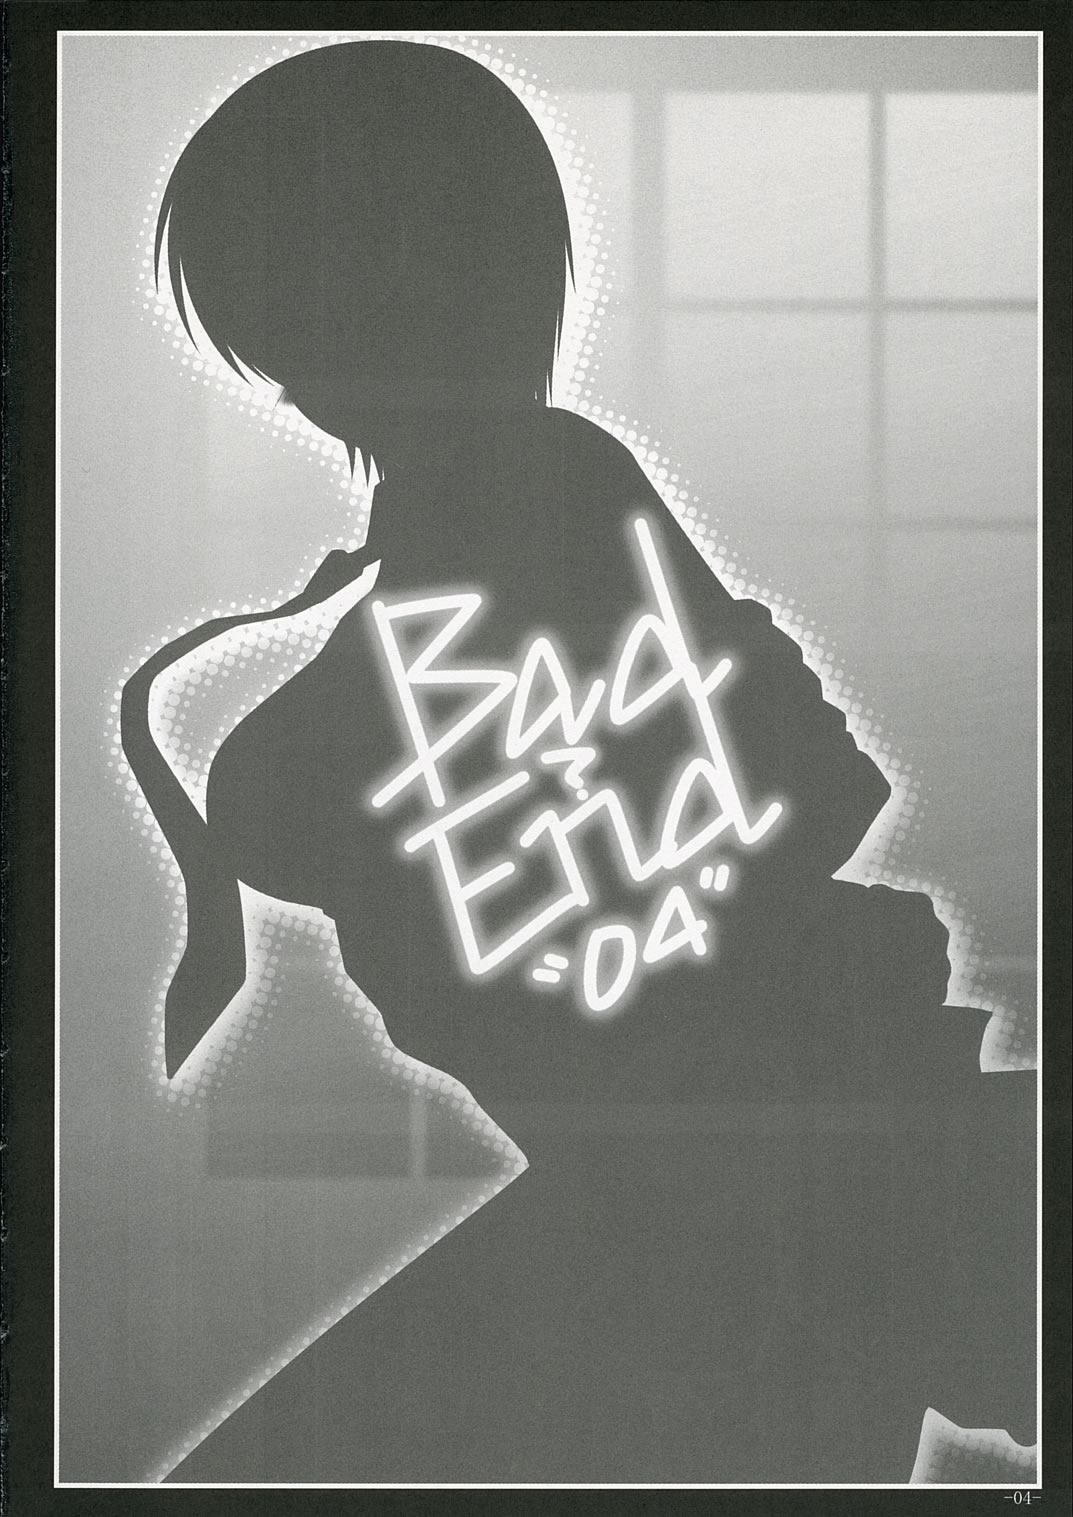 BAD？END-04- 3ページ